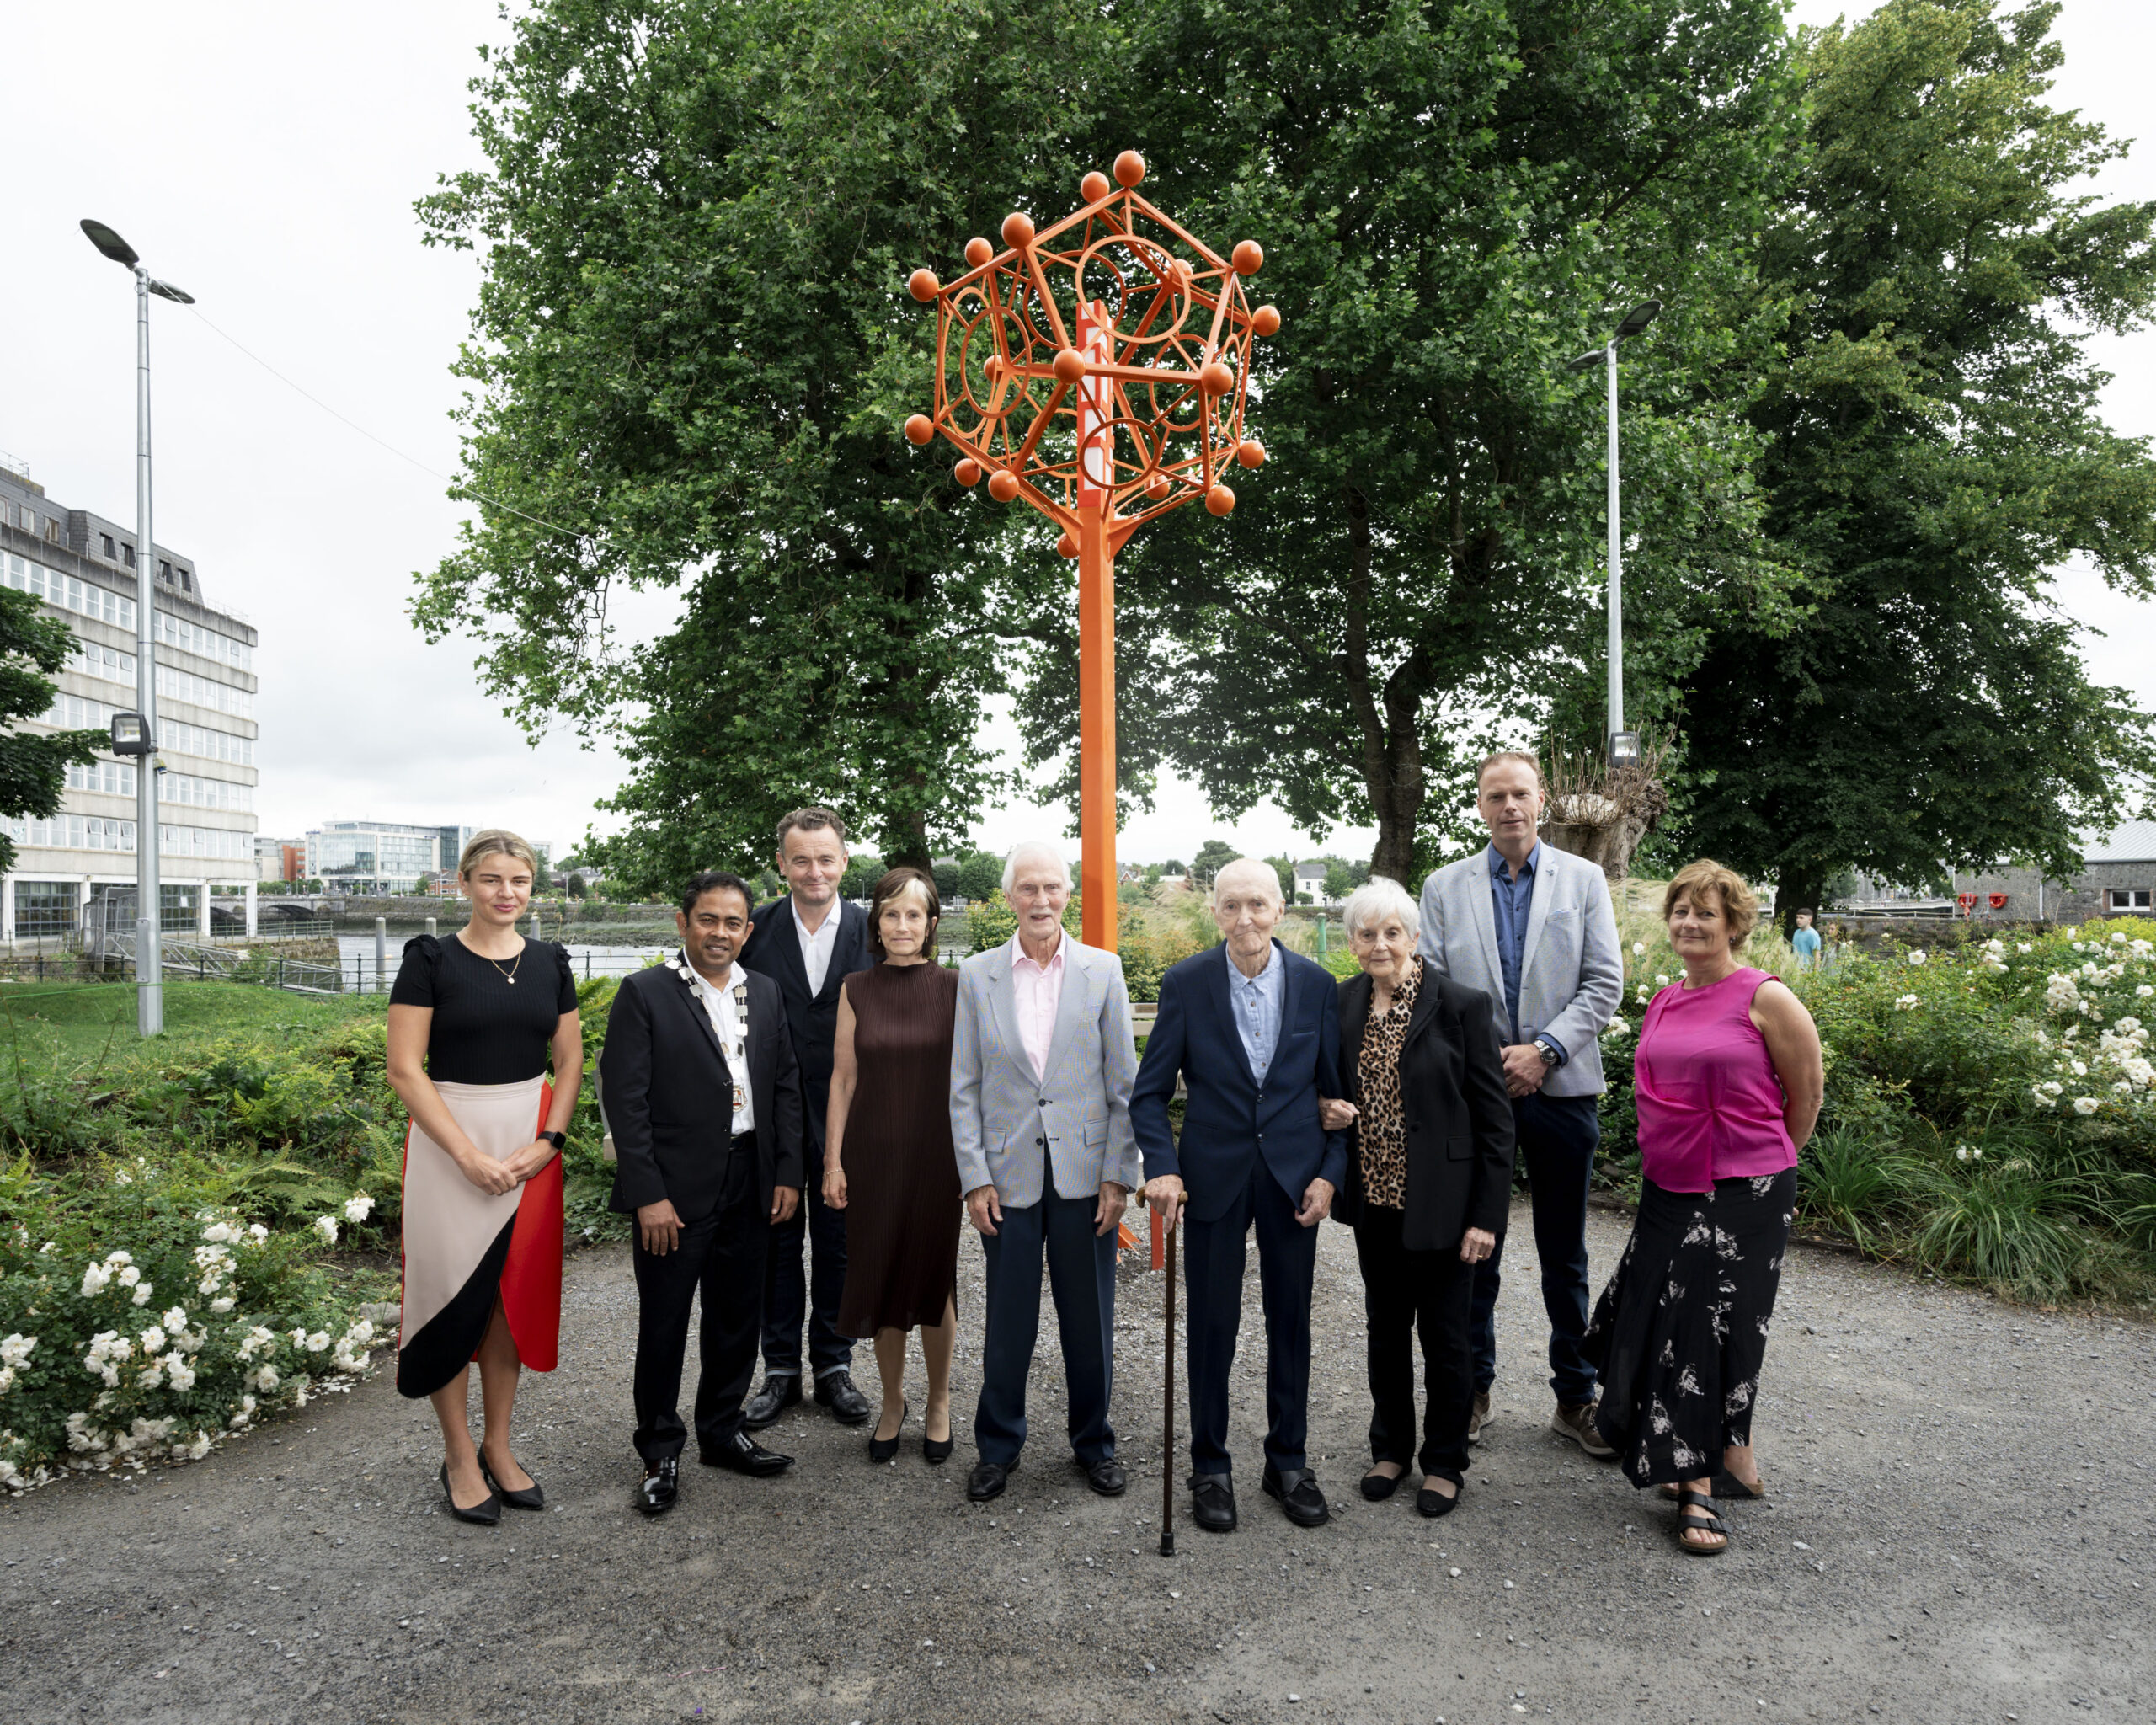 (l to r): Giedre Visockaite of Kirby Group Engineering,  Councillor Azad Talukder, Cathaoirleach of the Metropolitan District of Limerick, Artist Paul Harrison, Elizabeth Kirby, Michael Kirby, Tom Kirby, Rita Kirby, Ruairí Ryan of Kirby Group Engineering, Jill Cousins of The Hunt Museum, pictured at the Hunt Museum in Limerick, for the unveiling of a sculpture by artist Paul Harrison, part of its Museum in a Garden project.